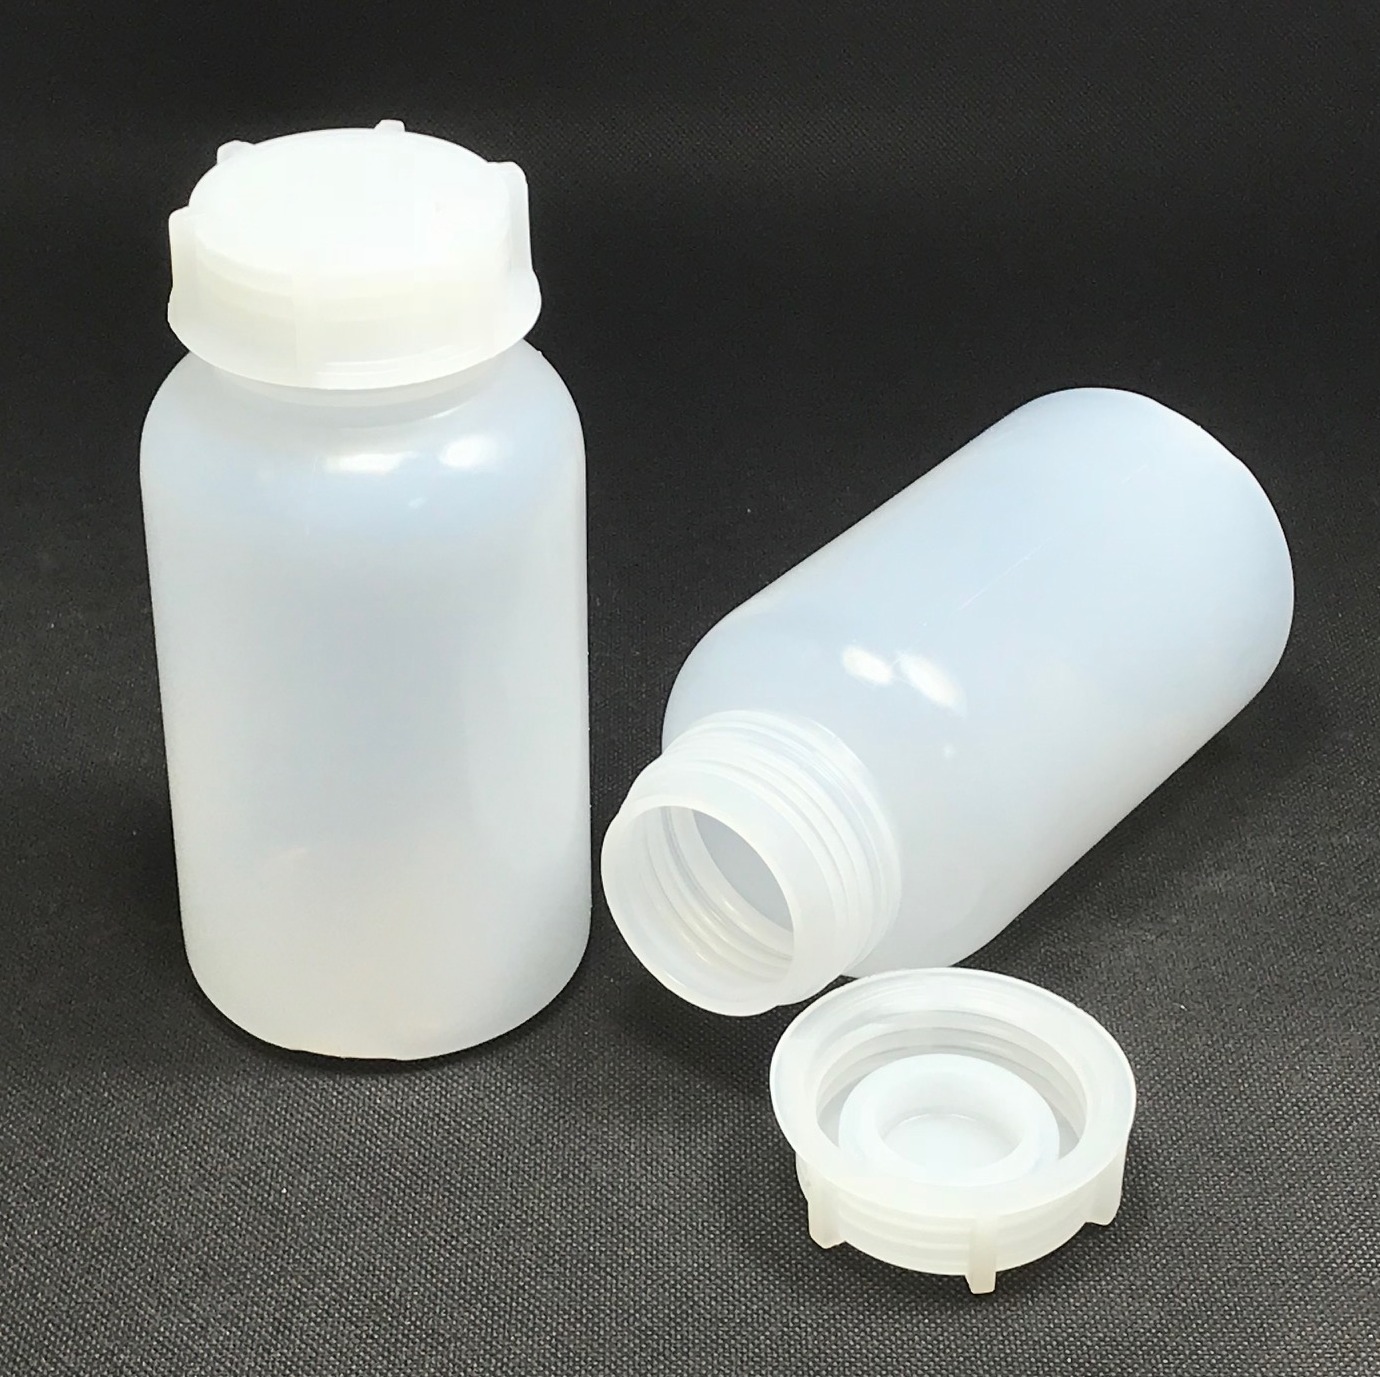 Replacement powder containers